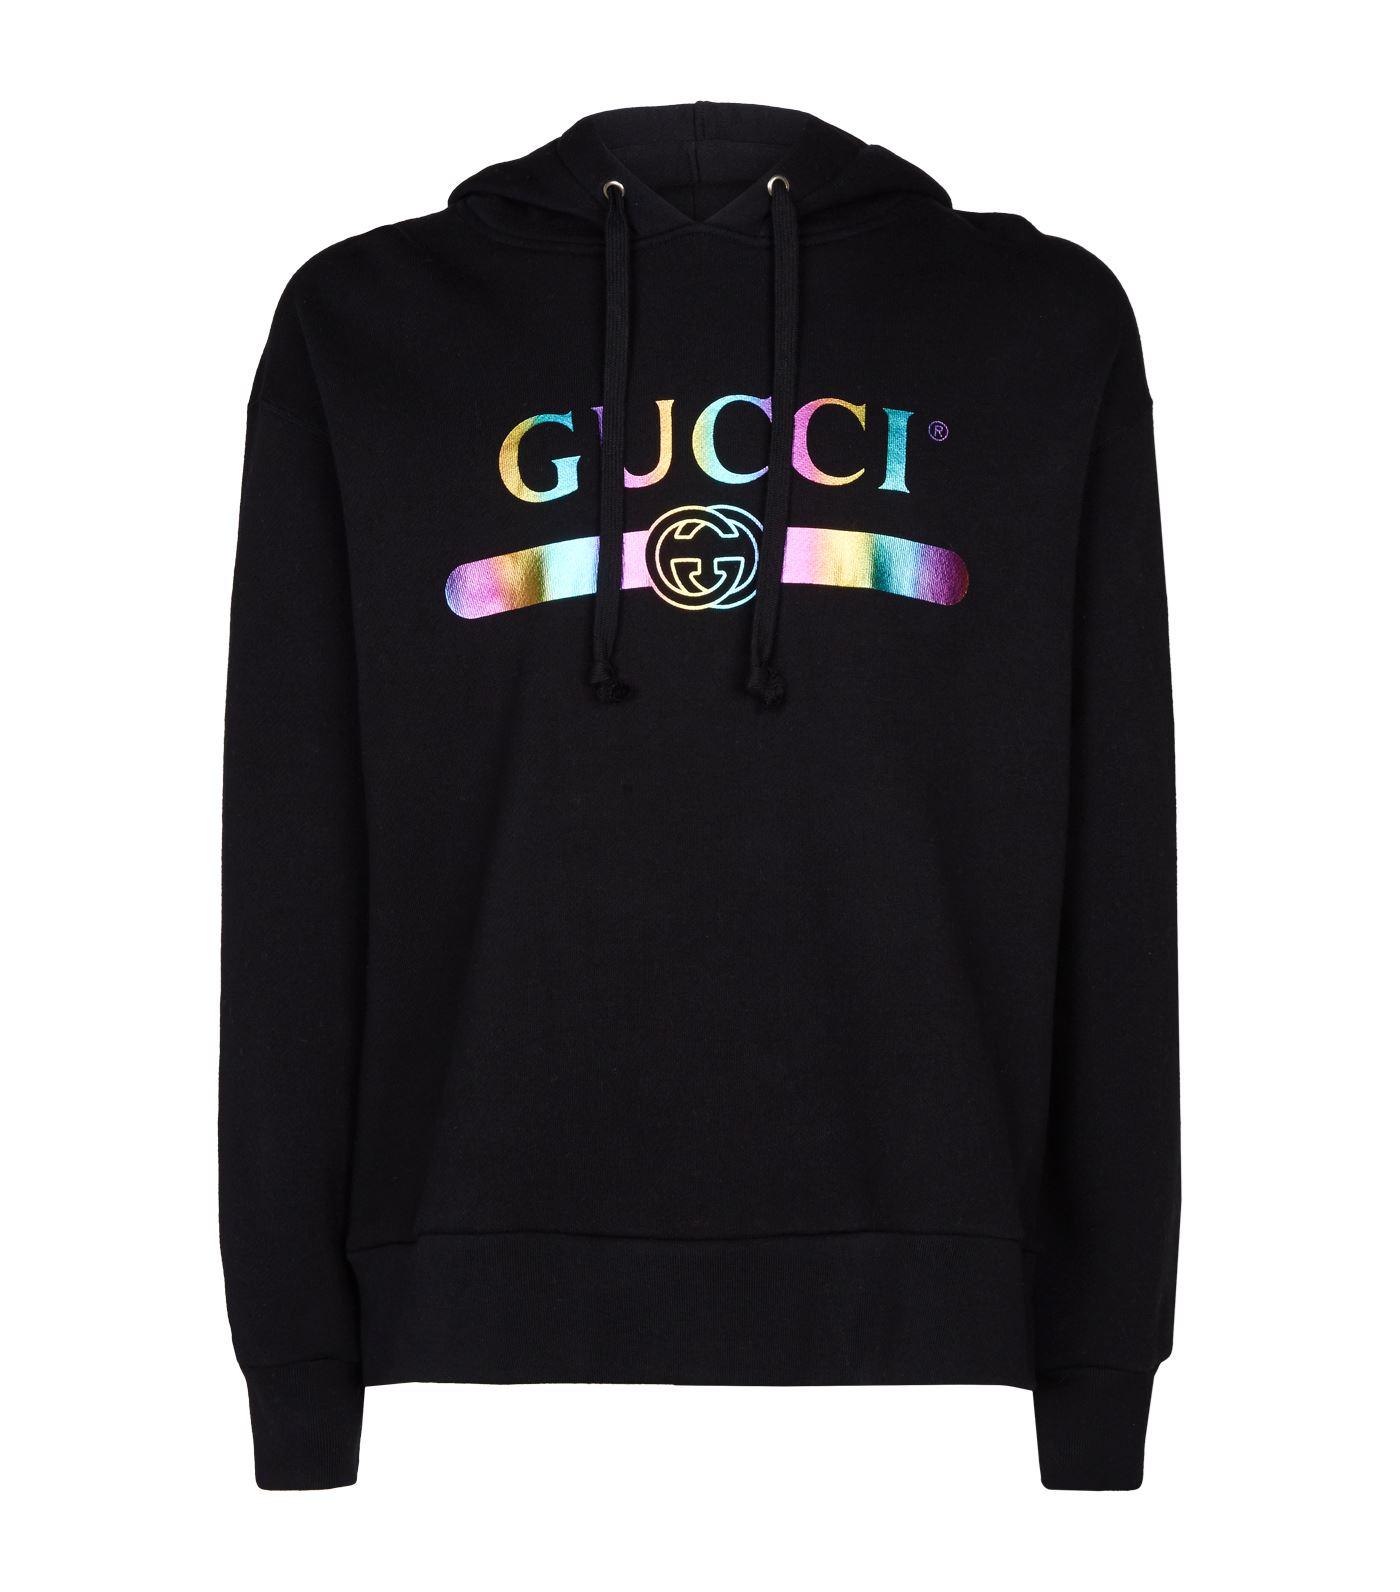 Gucci Cotton Oversized Logo Hoodie in Black for Men - Lyst